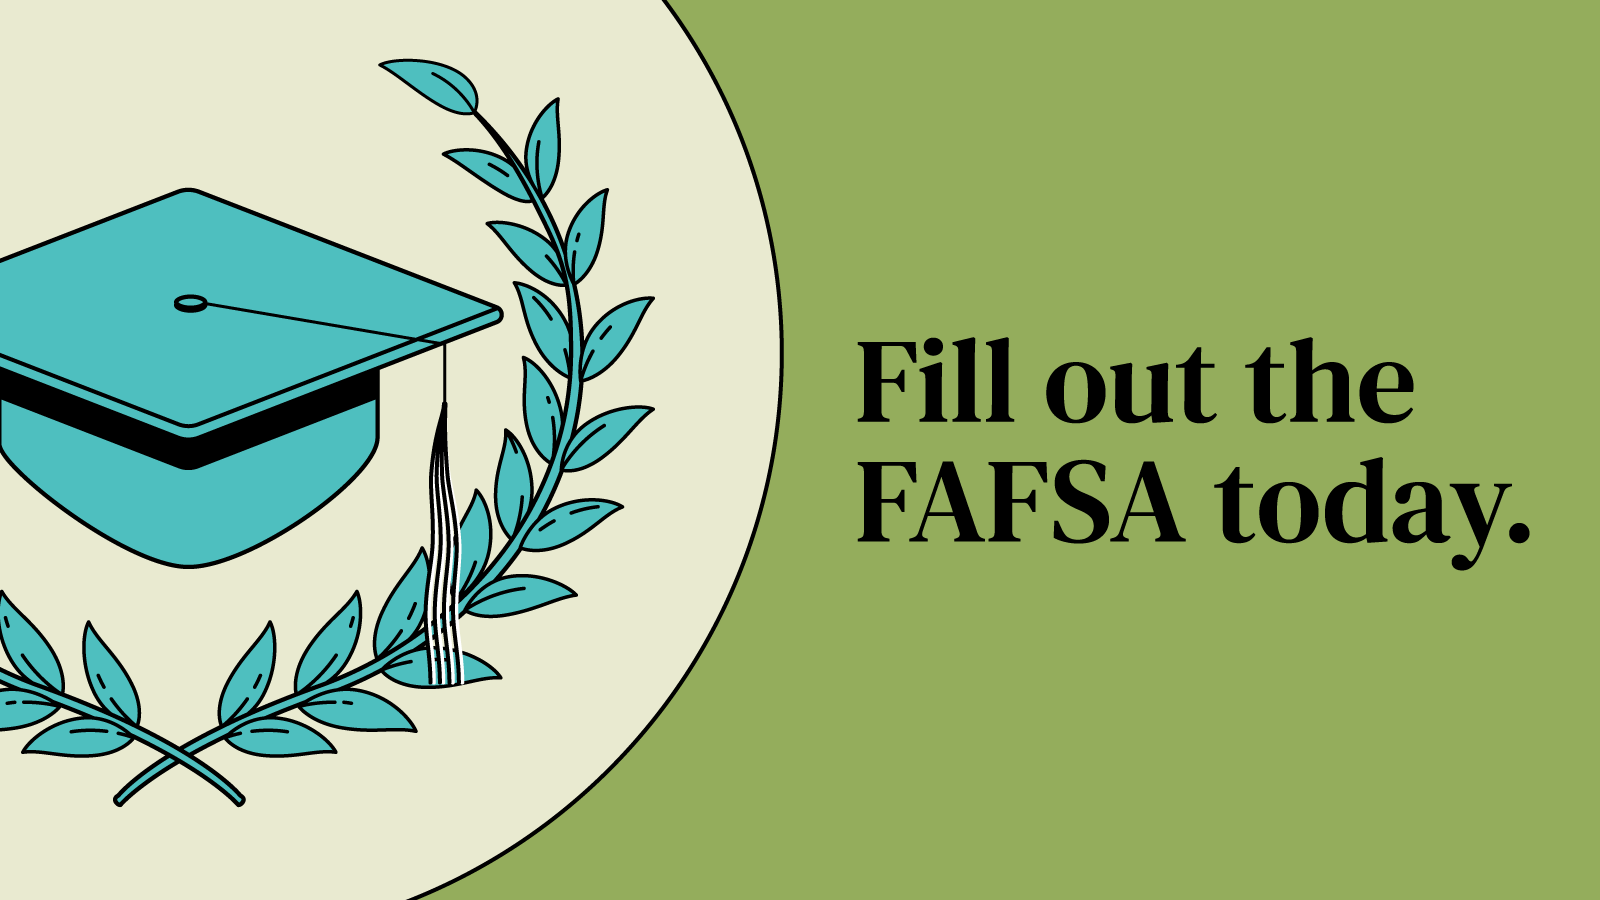 A graphic reminding you to fill out the FAFSA today.